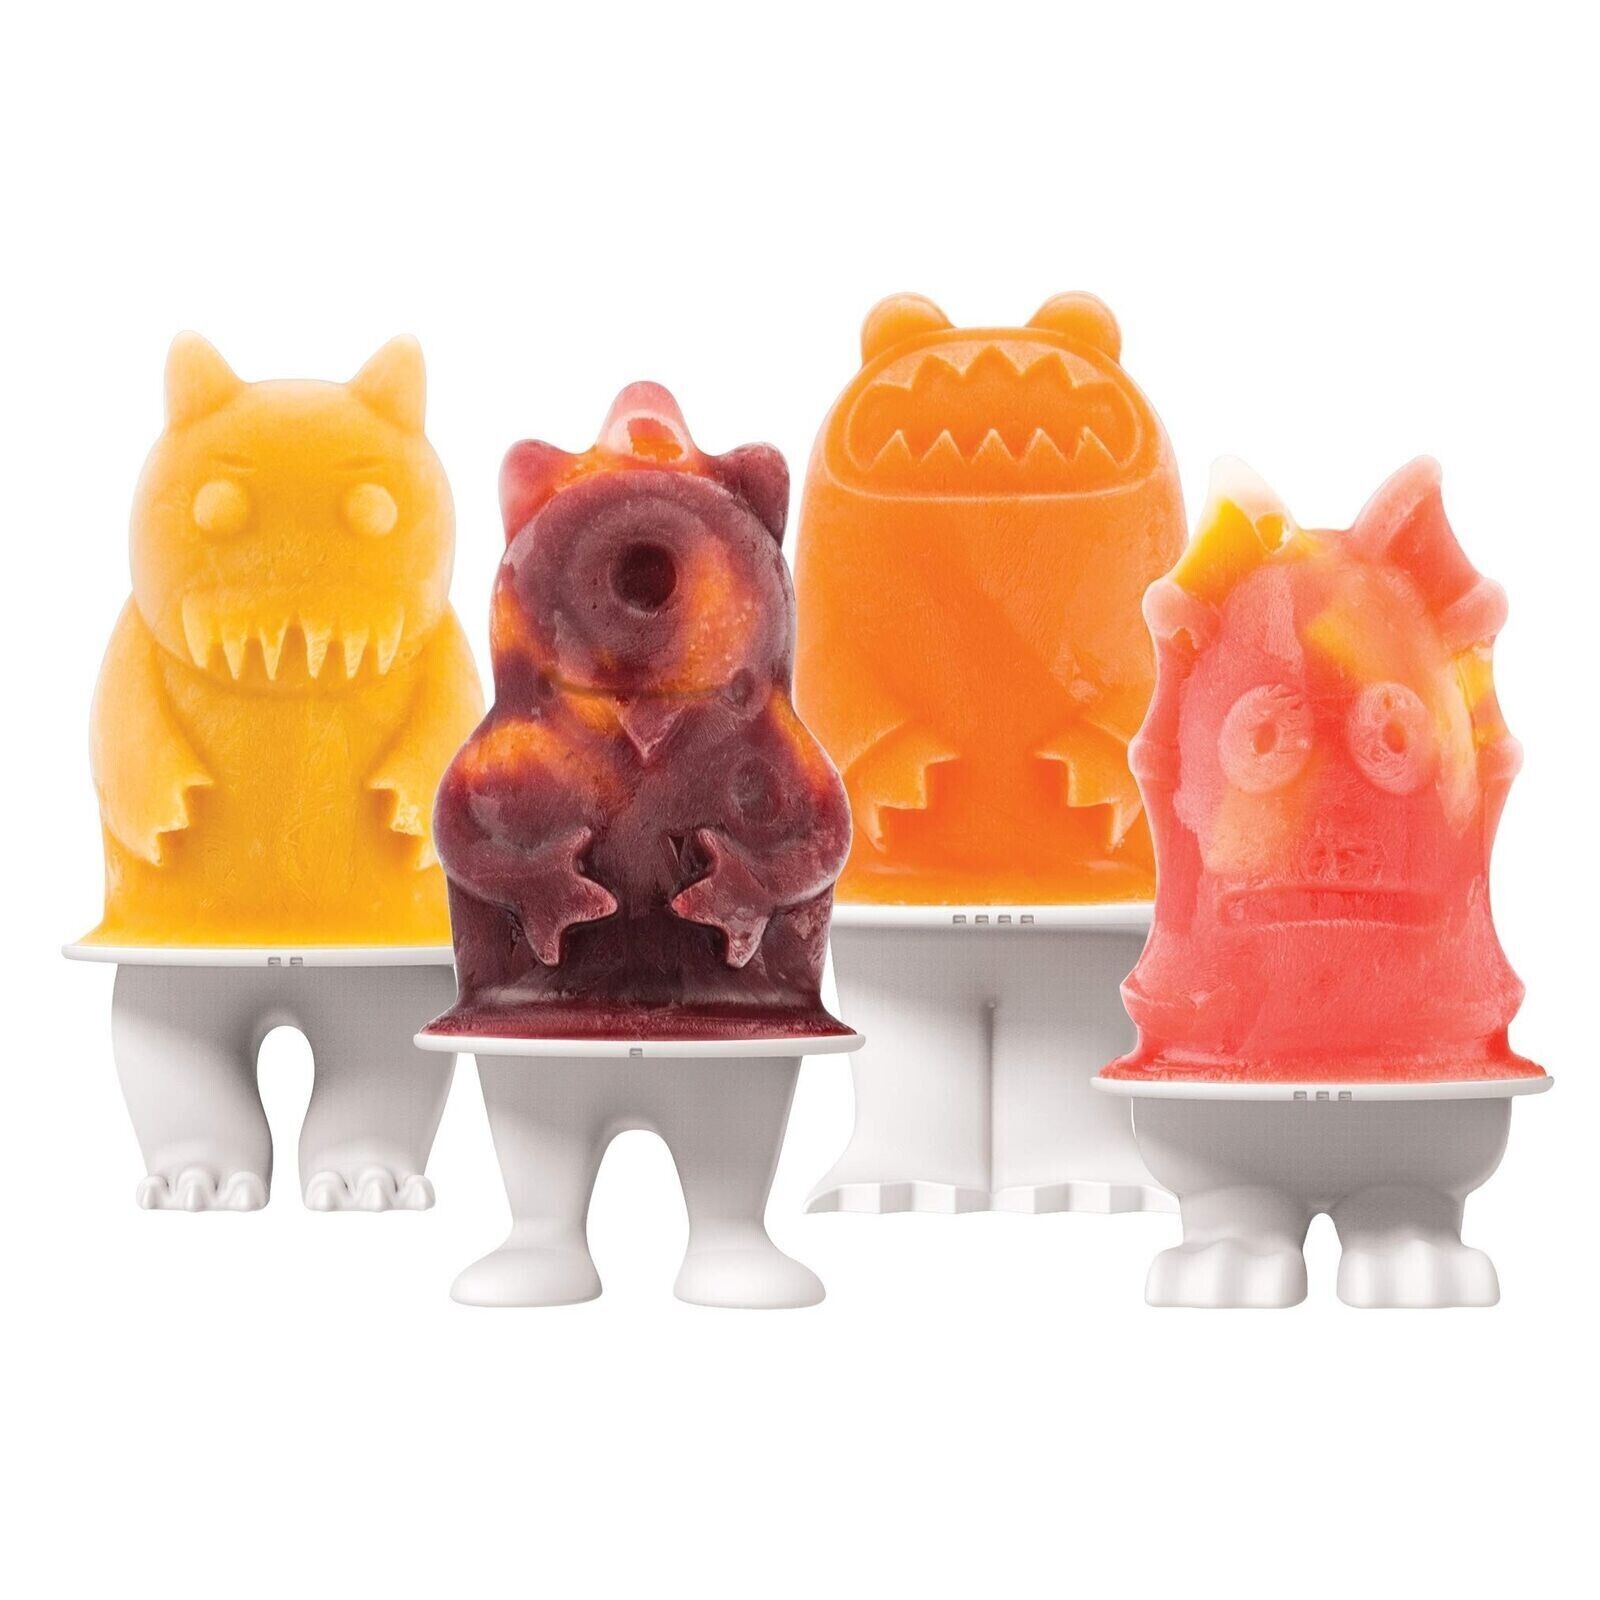 Primary image for Tovolo Monster Popsicle Molds (Set of 4) - Reusable Mess-Free Silicone Ice Po...